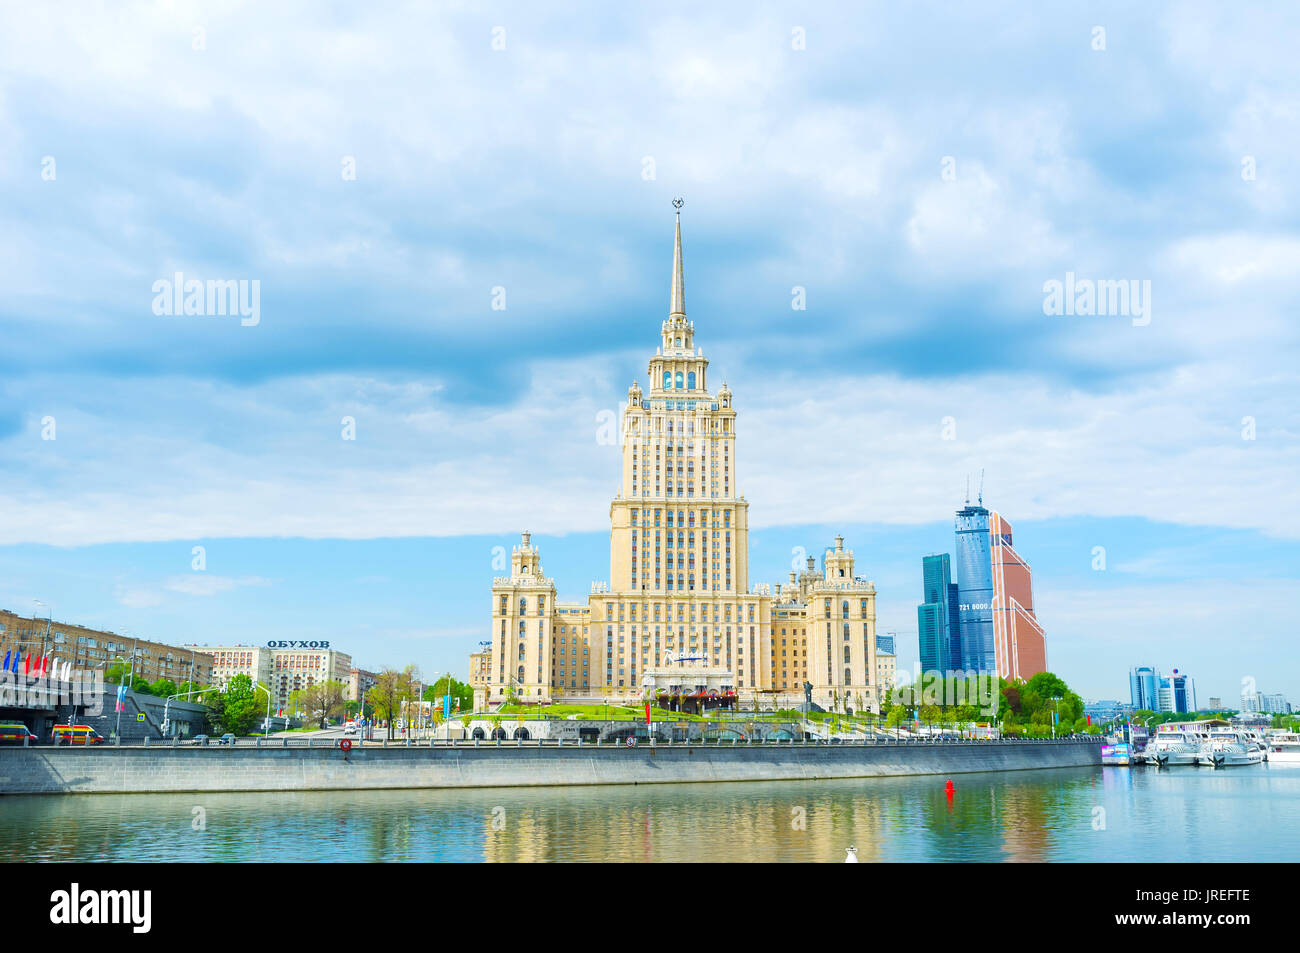 MOSCOW, RUSSIA - MAY 11, 2015: The five stars Radisson Royal Hotel in Moscow located in former Hotel Ukraina building, on May 11 in Moscow Stock Photo